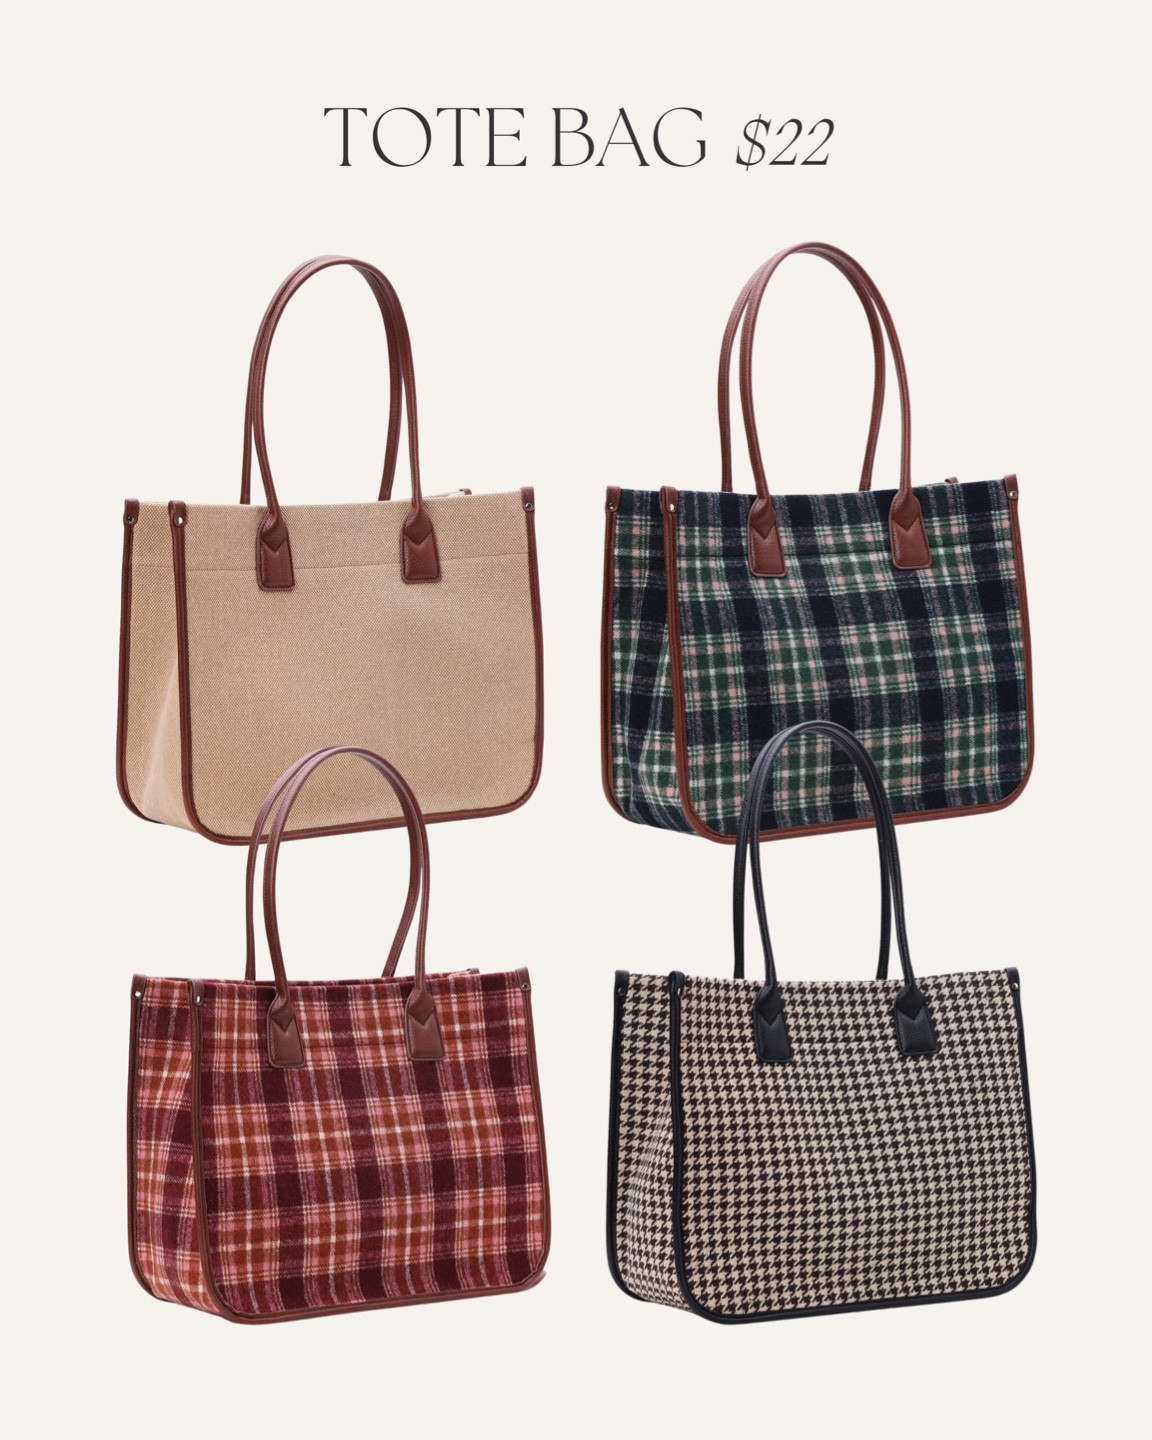 Time and Tru Women's Houndstooth Mini Tote Bag